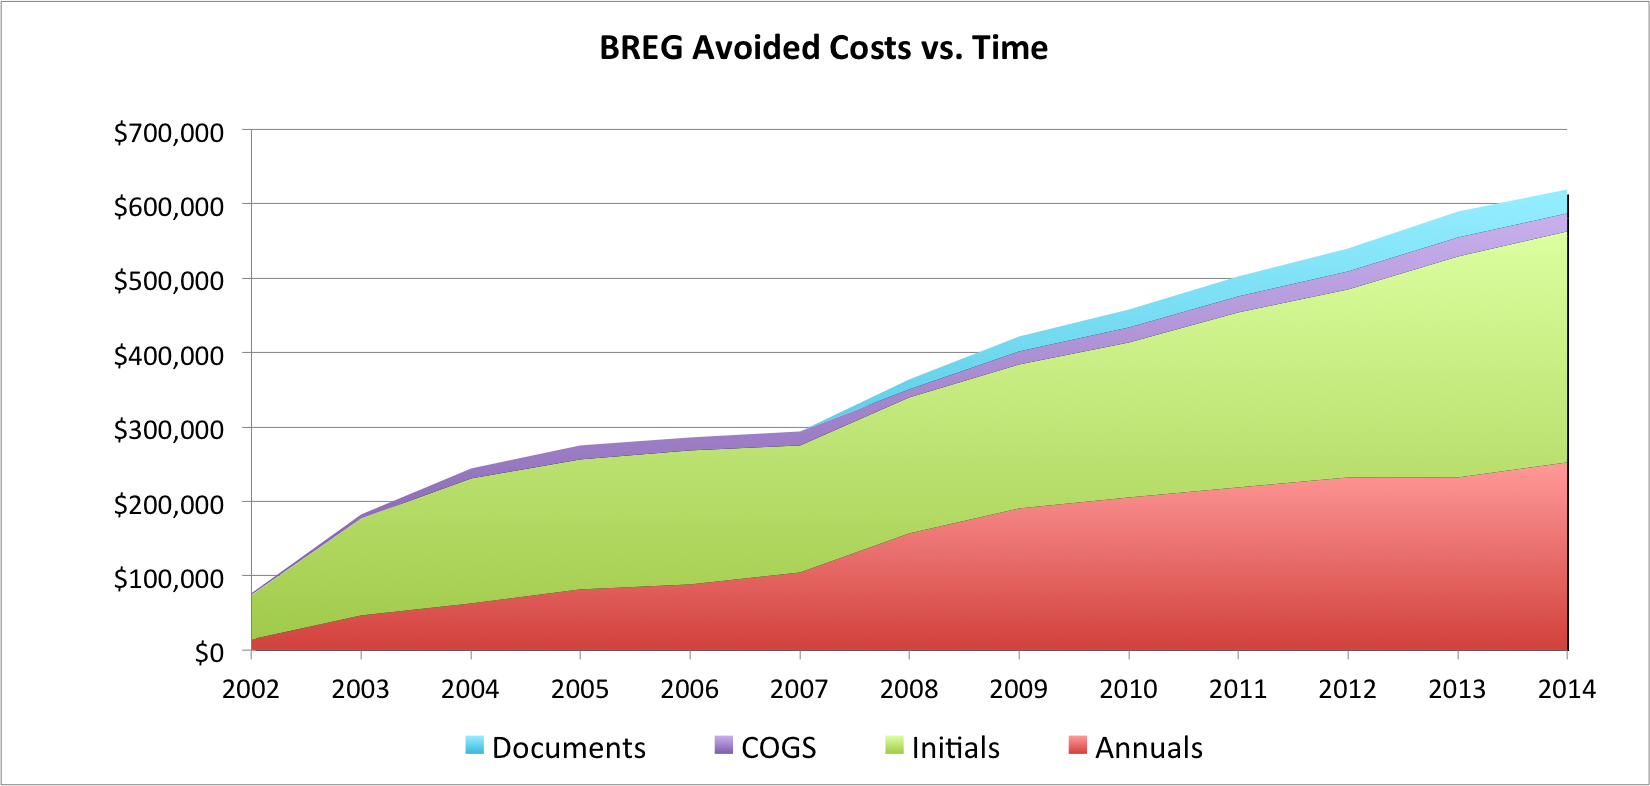 A graph depicting the BREG avoided costs of 600,000 dollars per year.